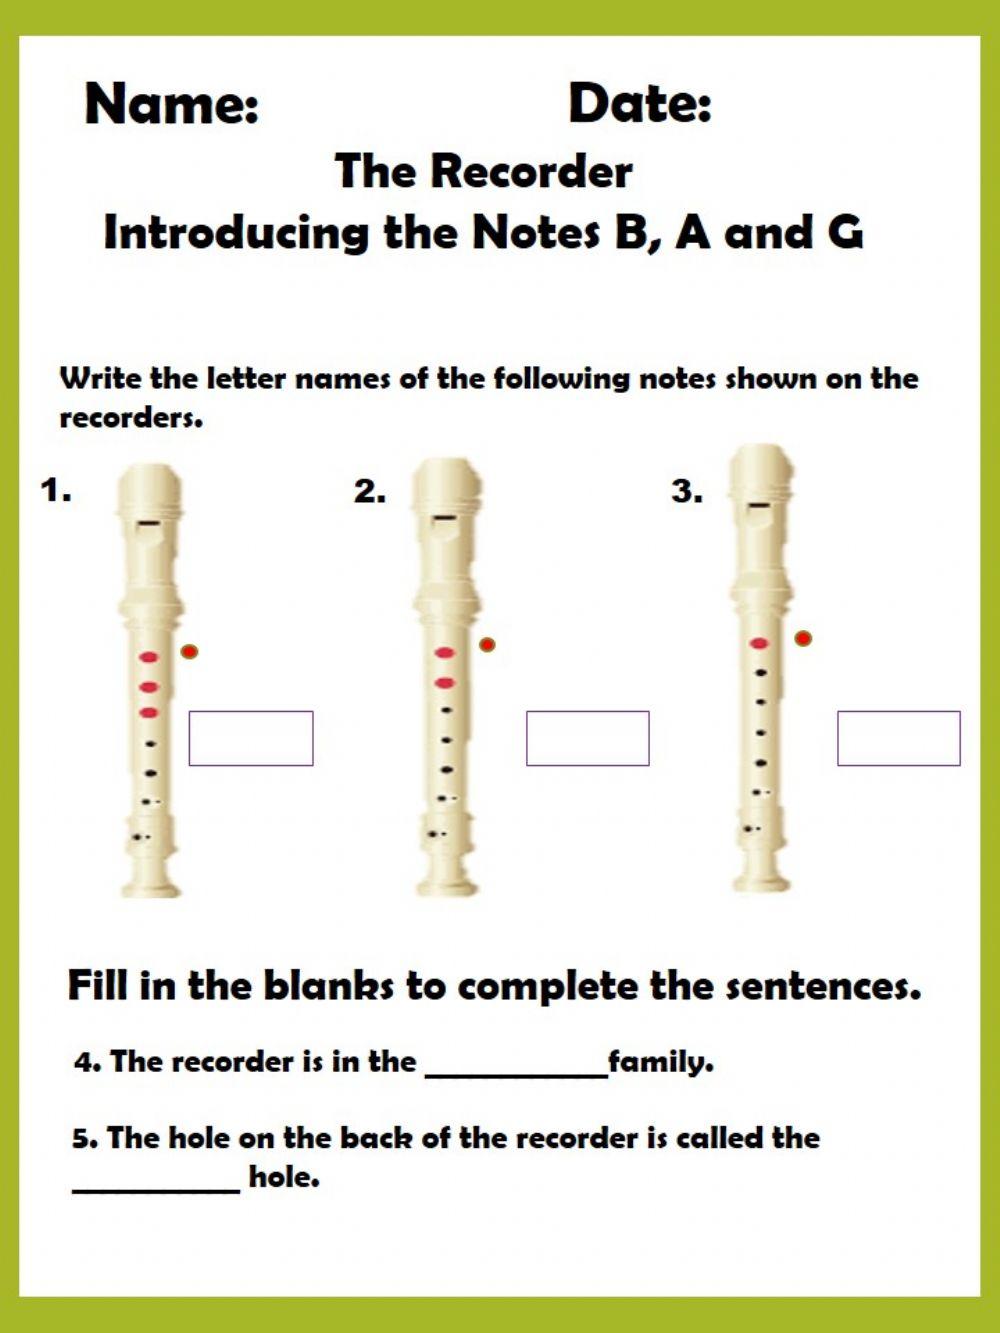 Introducing Recorder: Notes B, A, G